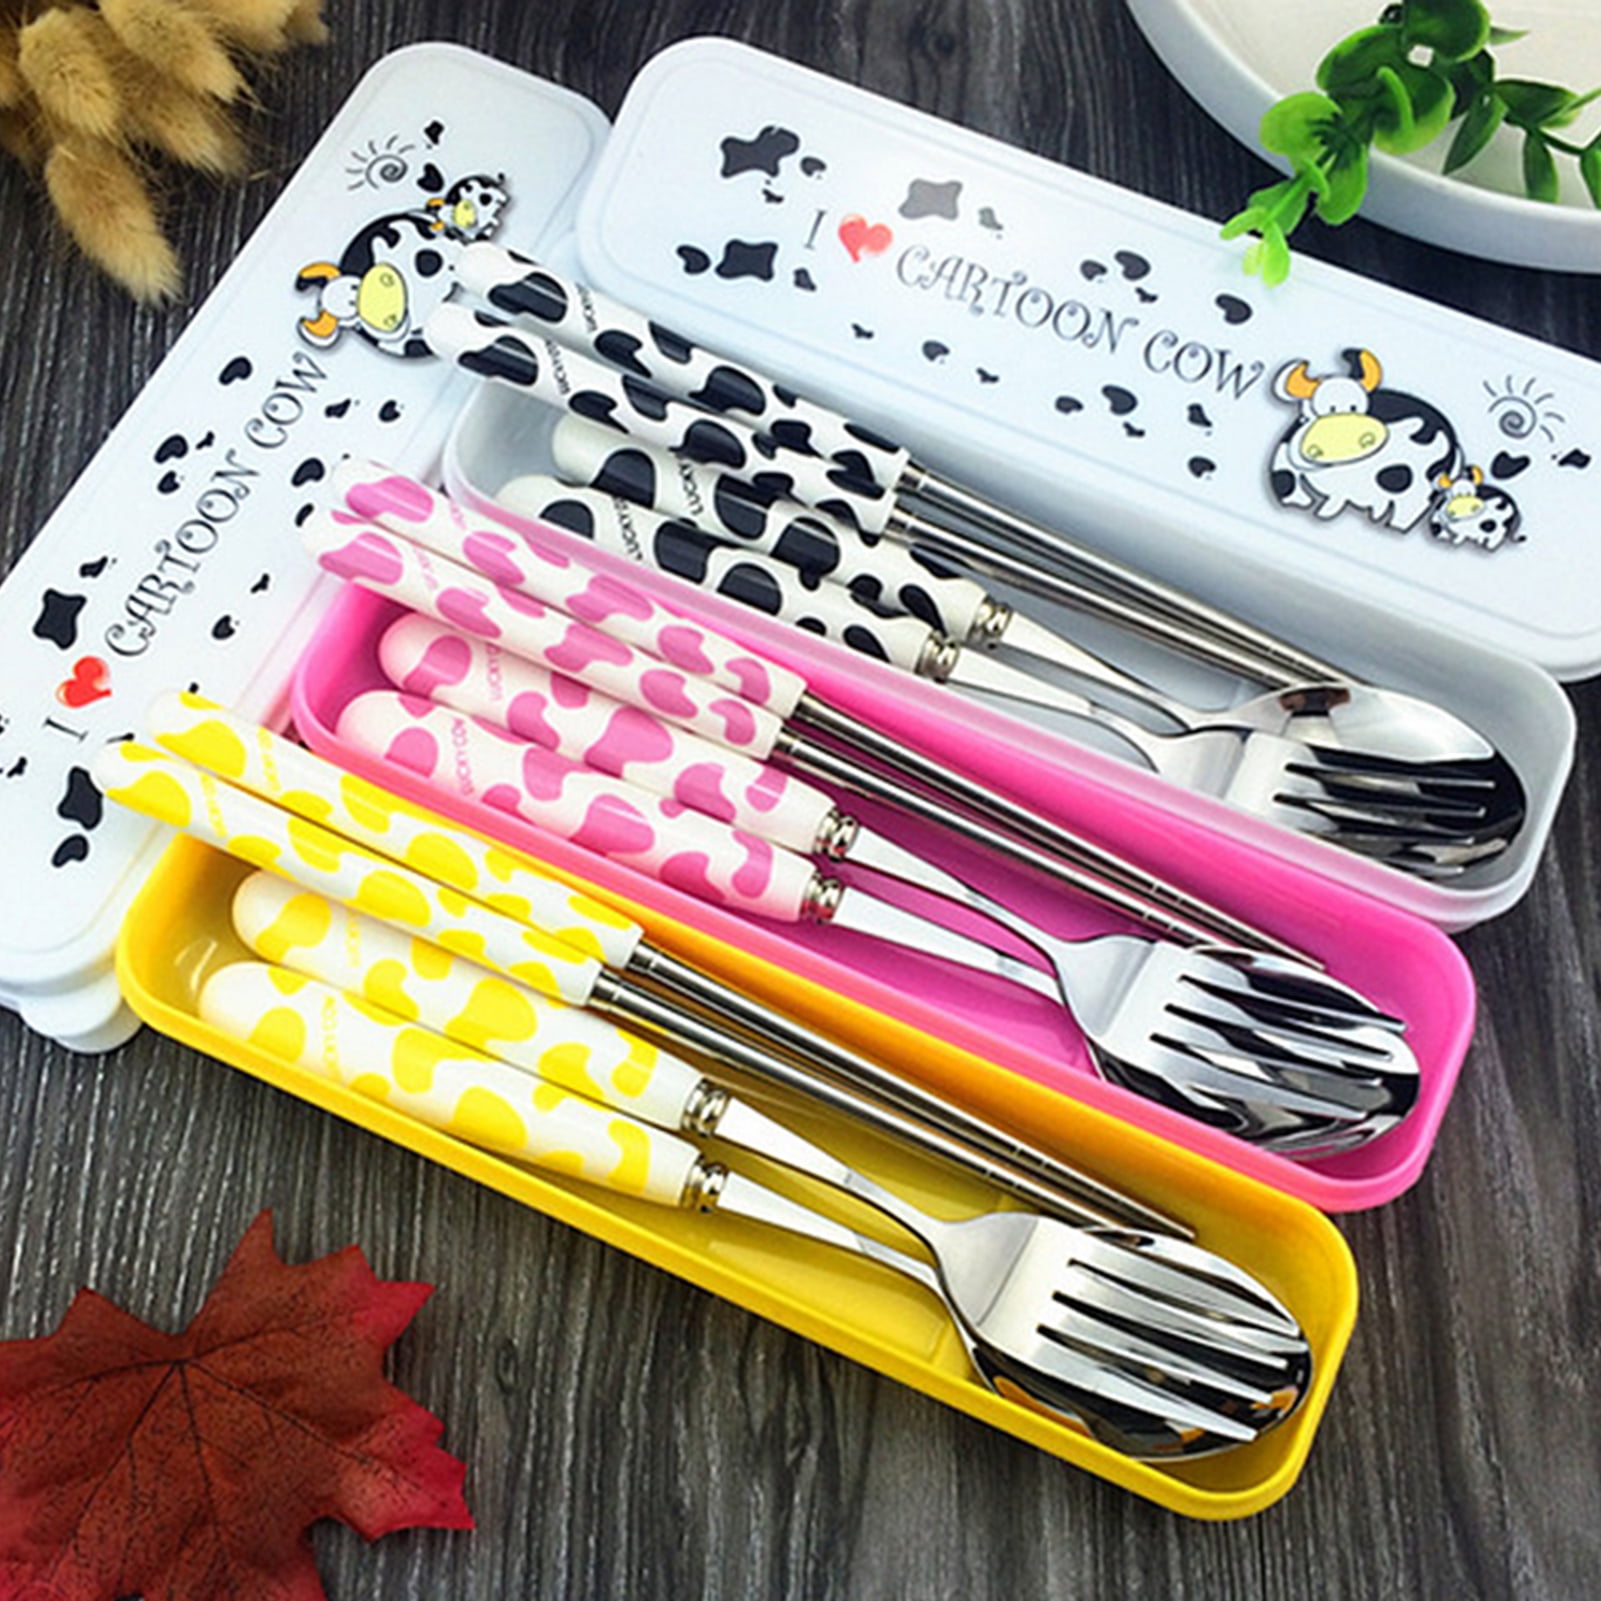 1Set Chopsticks Spoons Fork Stainless steel Lovely Cutlery with Case for Travel 